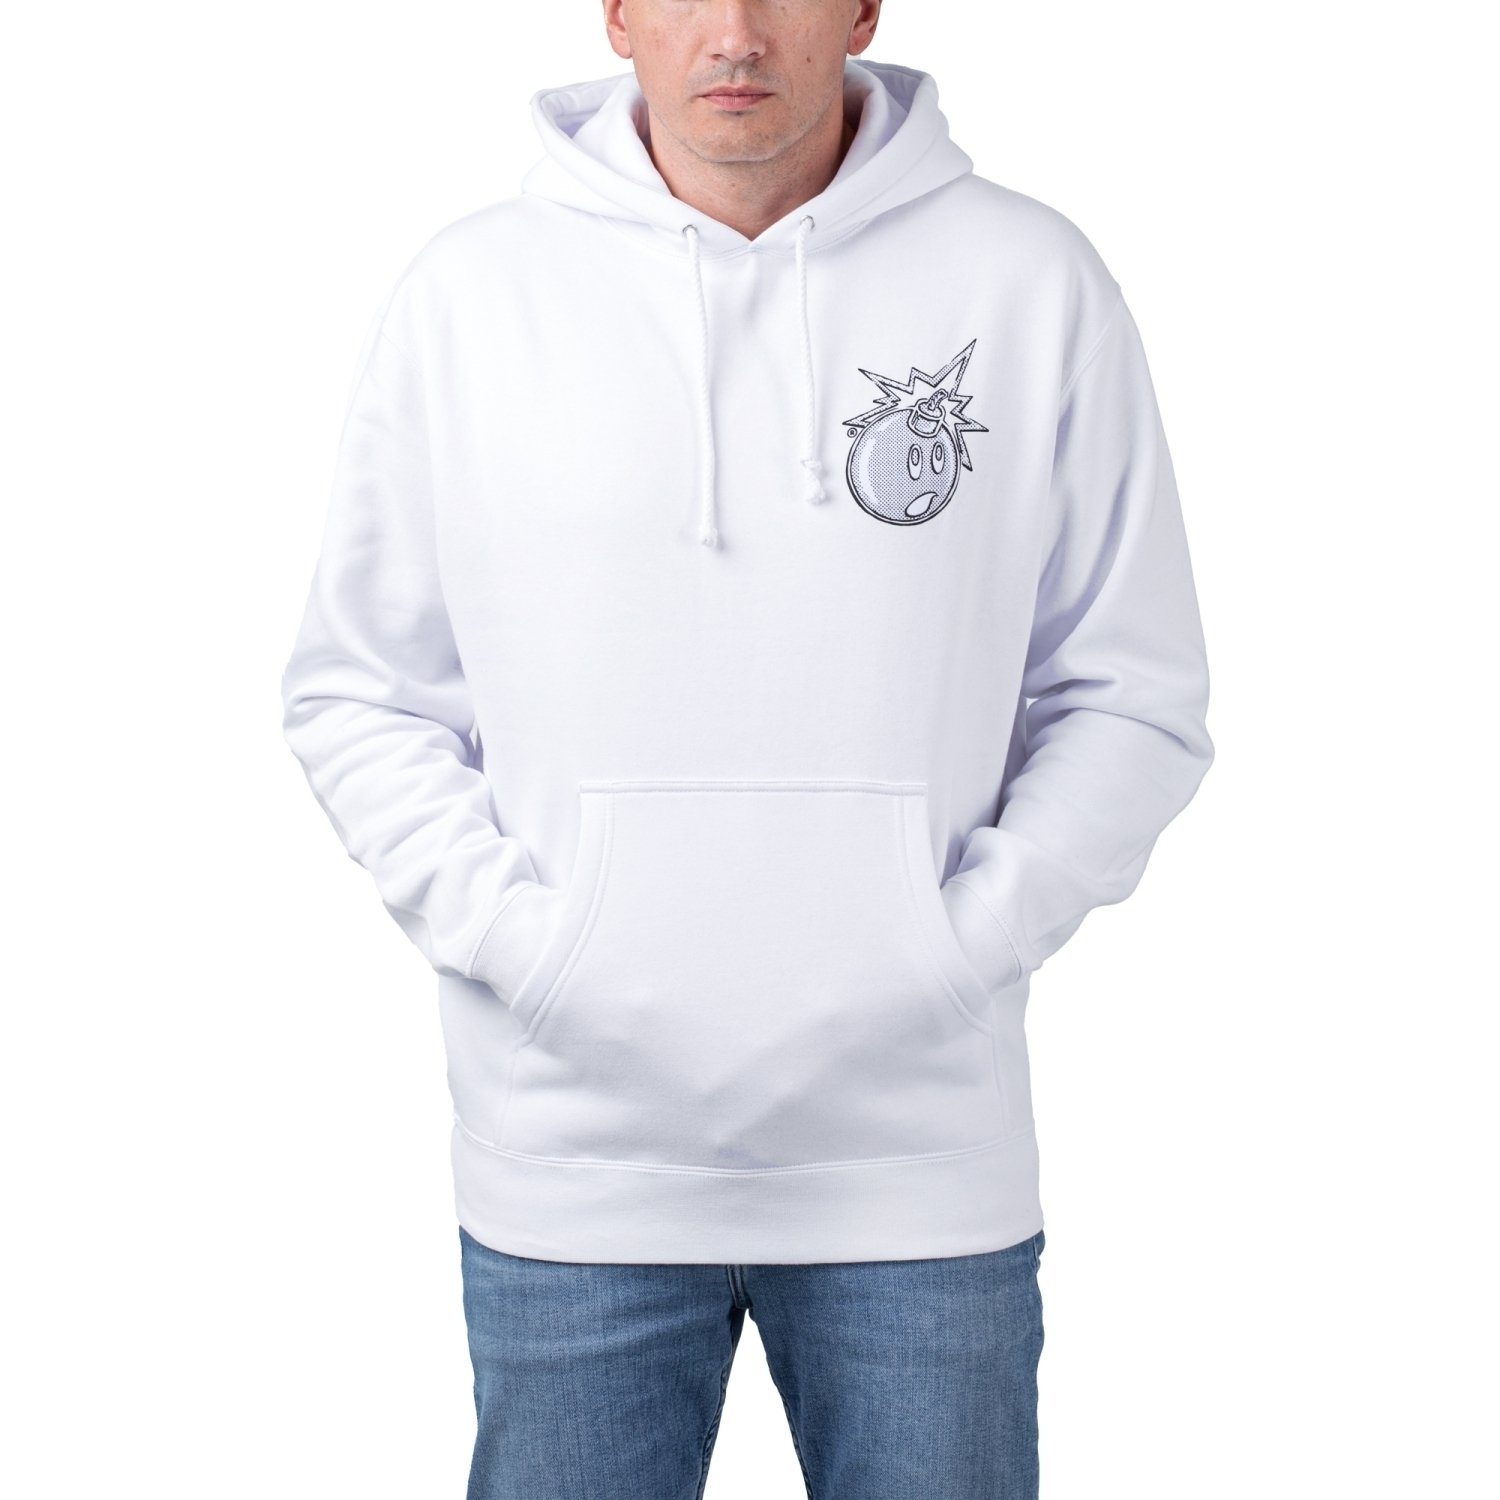 THE HUNDREDS® Hoodie The Hunderds Vides Adam Bomb Hoodie White